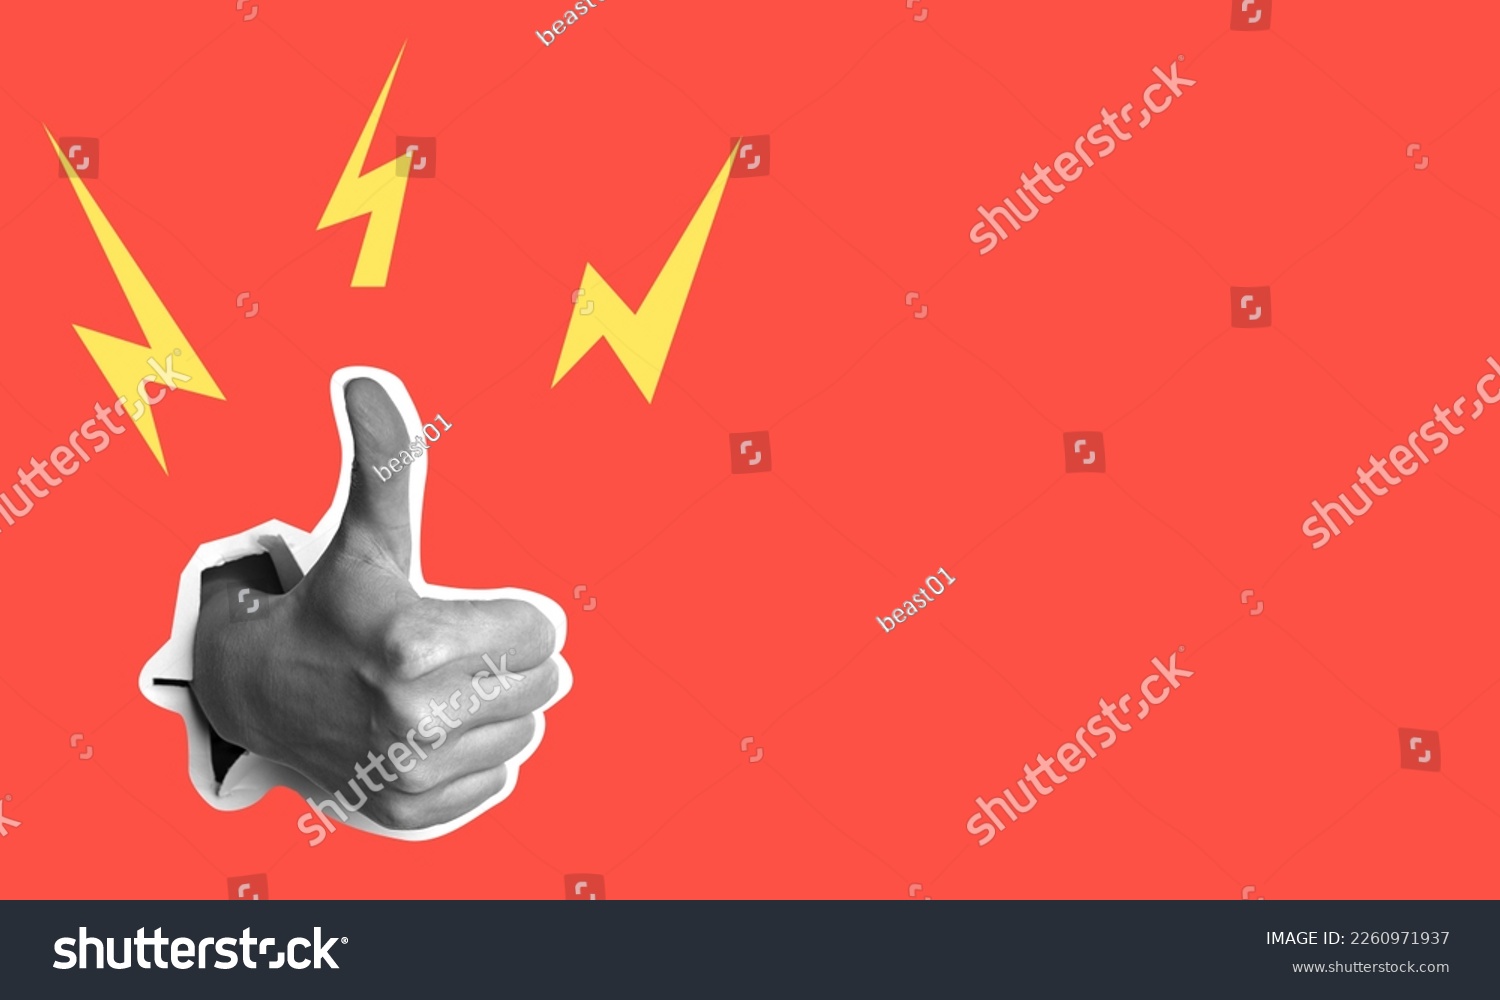 Female hand showing thumbs up gesture, on red background, art collage. Positive hand sign. Thumbs up fashion collage in magazine style. Modern art. Modern design. #2260971937